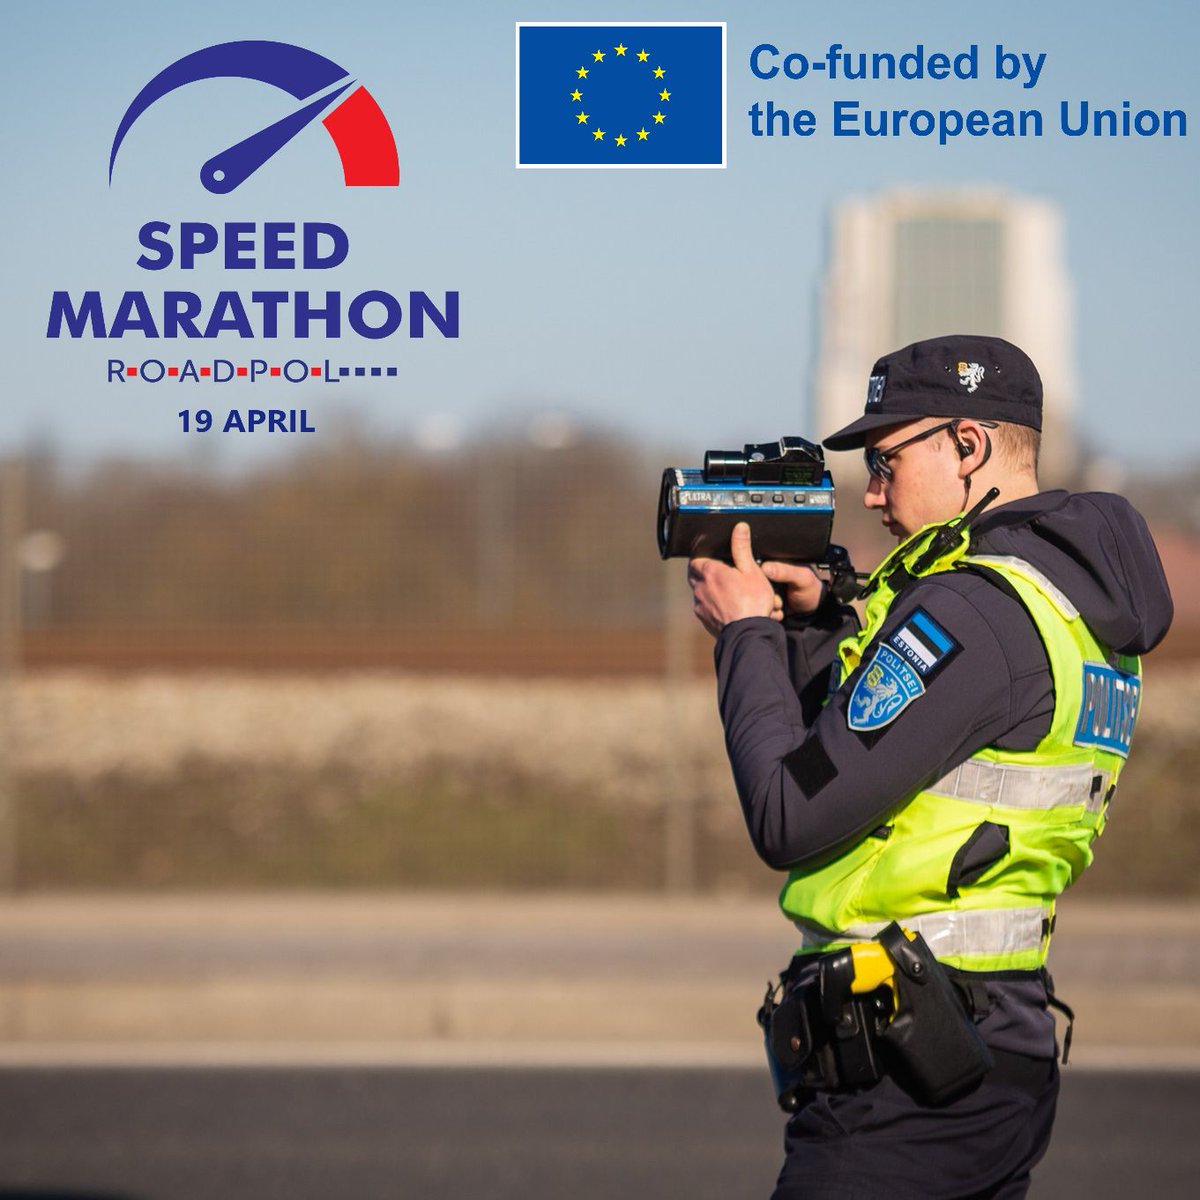 🚗 There are tens of methods to counter and prevent speeding. Numerous institutions fight it the way they can. ❗ ❗ ❗ Our way is control, enforcement and sanctions. 👮‍♀️ 👮‍♂️ Expect a flood of our officers next month. 🚨 For the eradication of speeding! #police #roadsafety